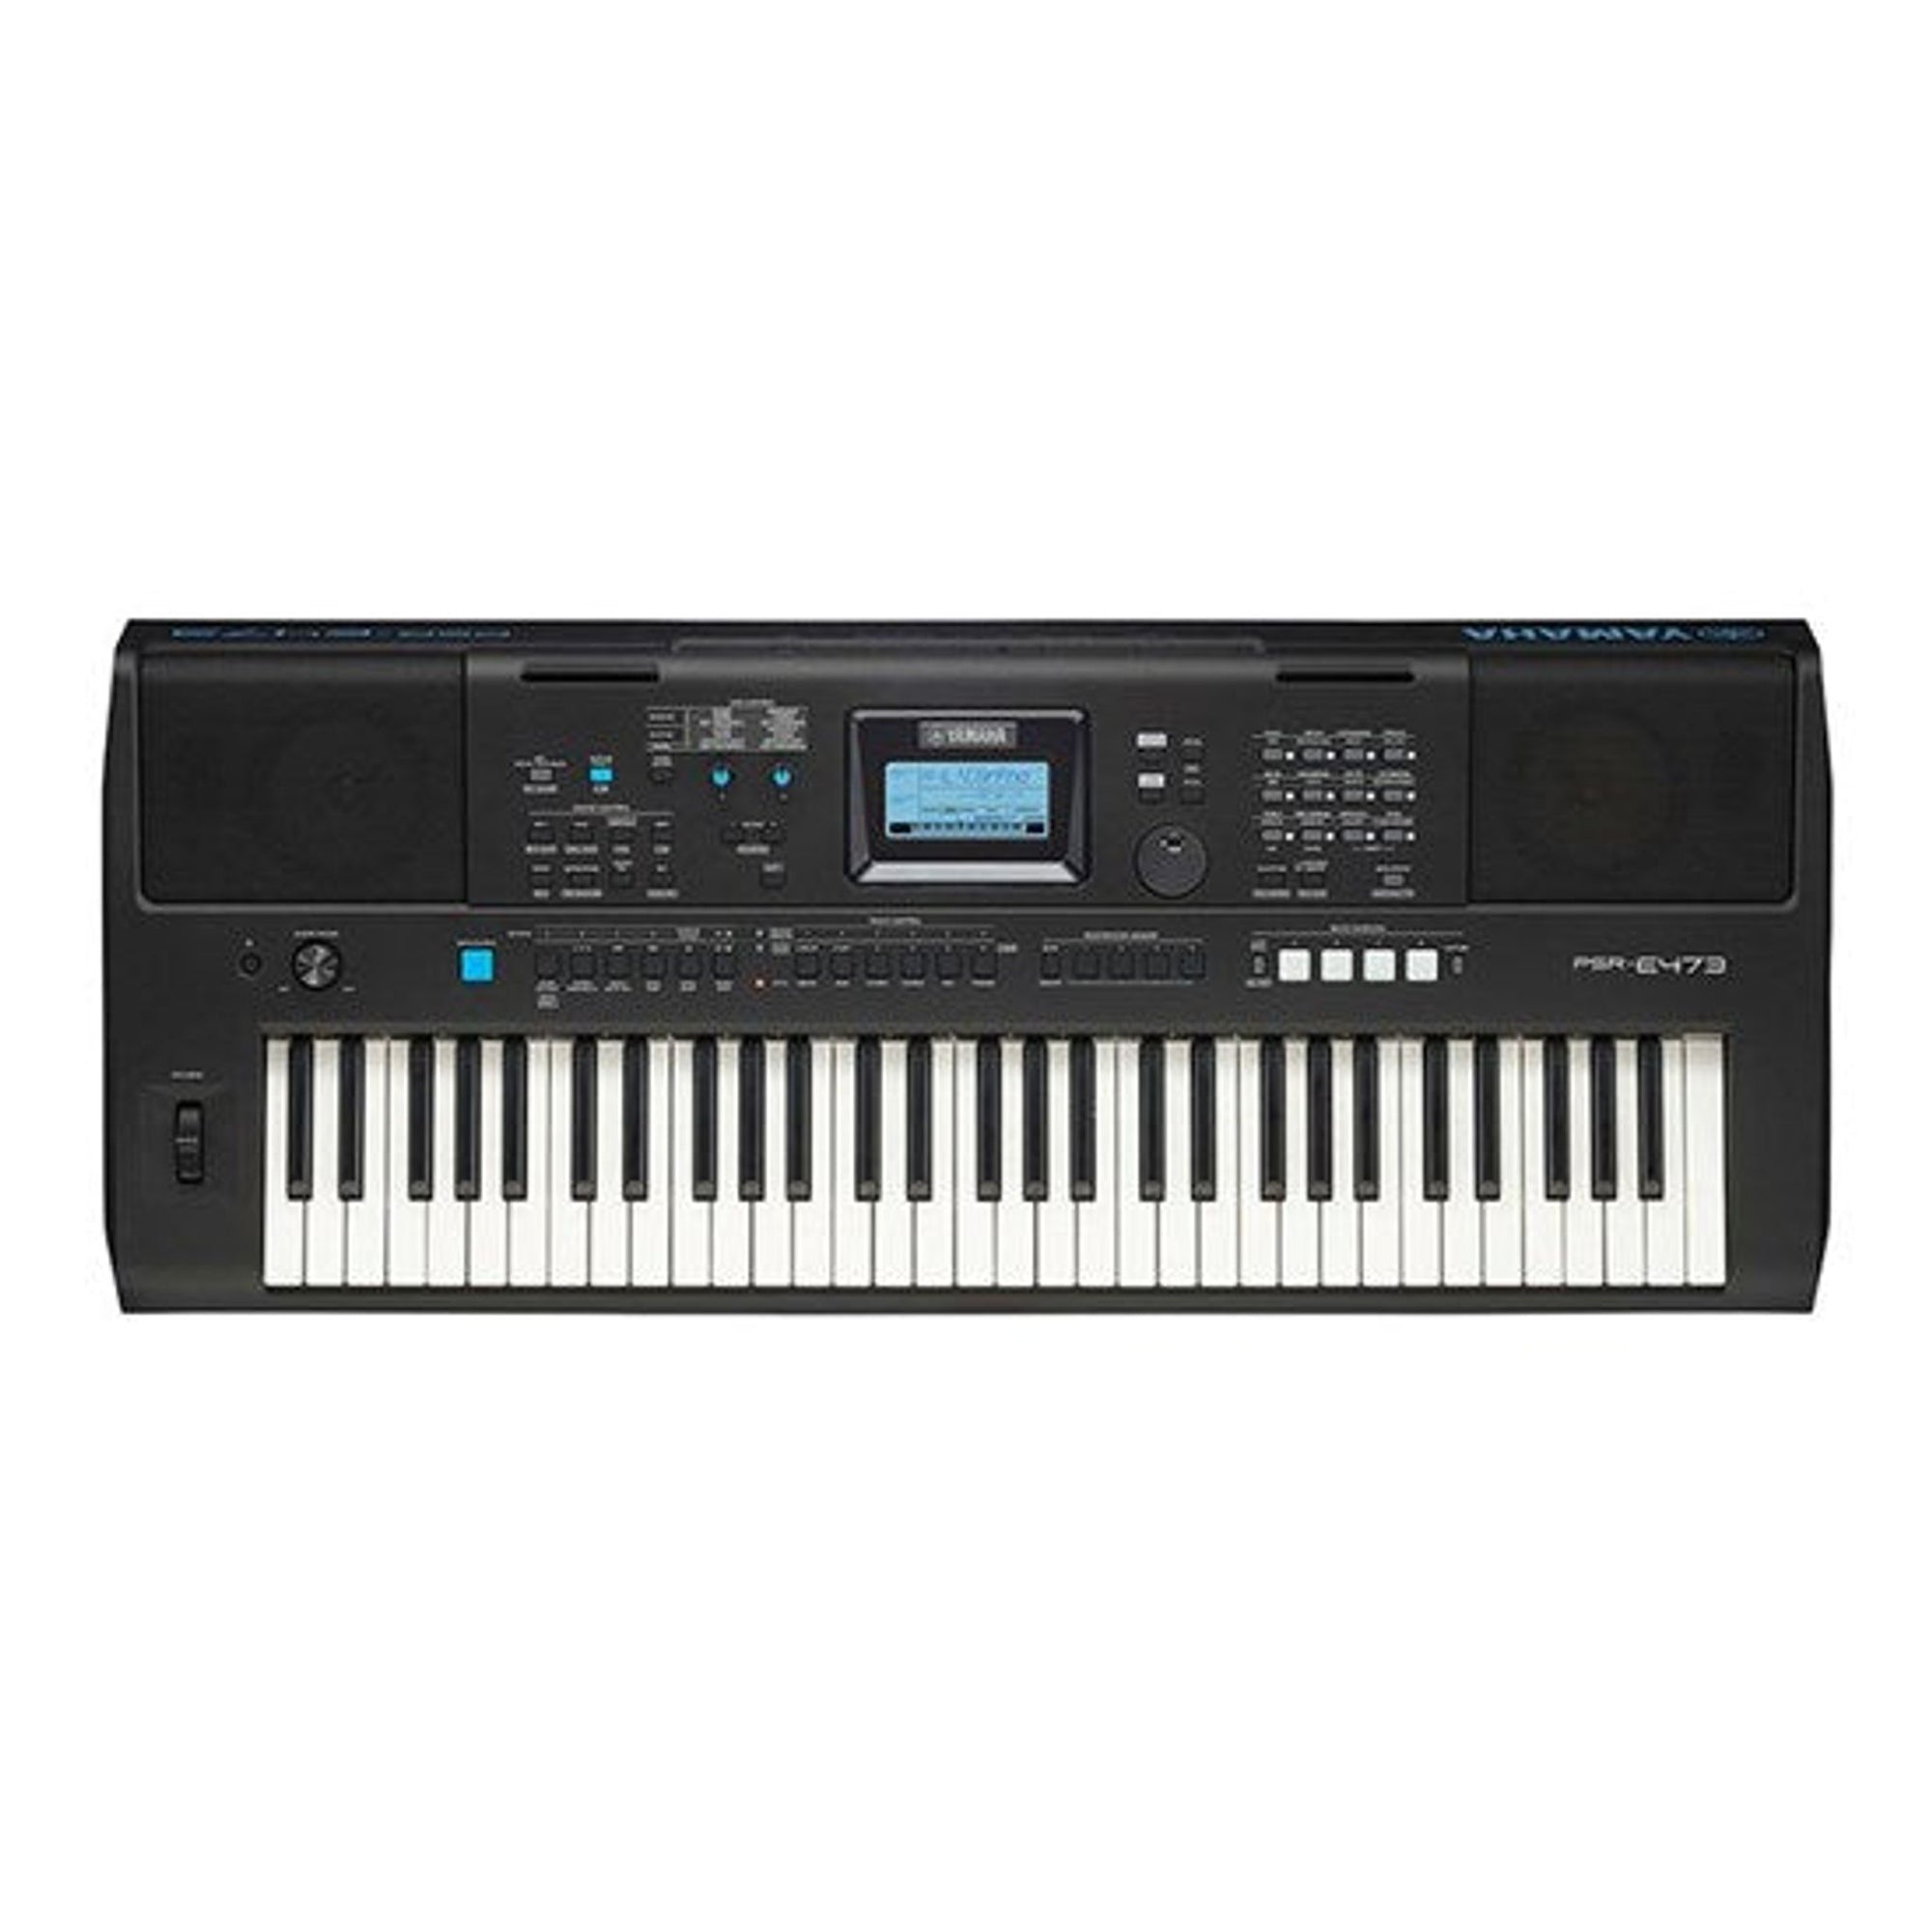 The Yamaha PSR-E473 Keyboard  is an excellent all-round 61-key keyboard that is ideal as a starter instrument but also represents a robust alternative for experienced players.